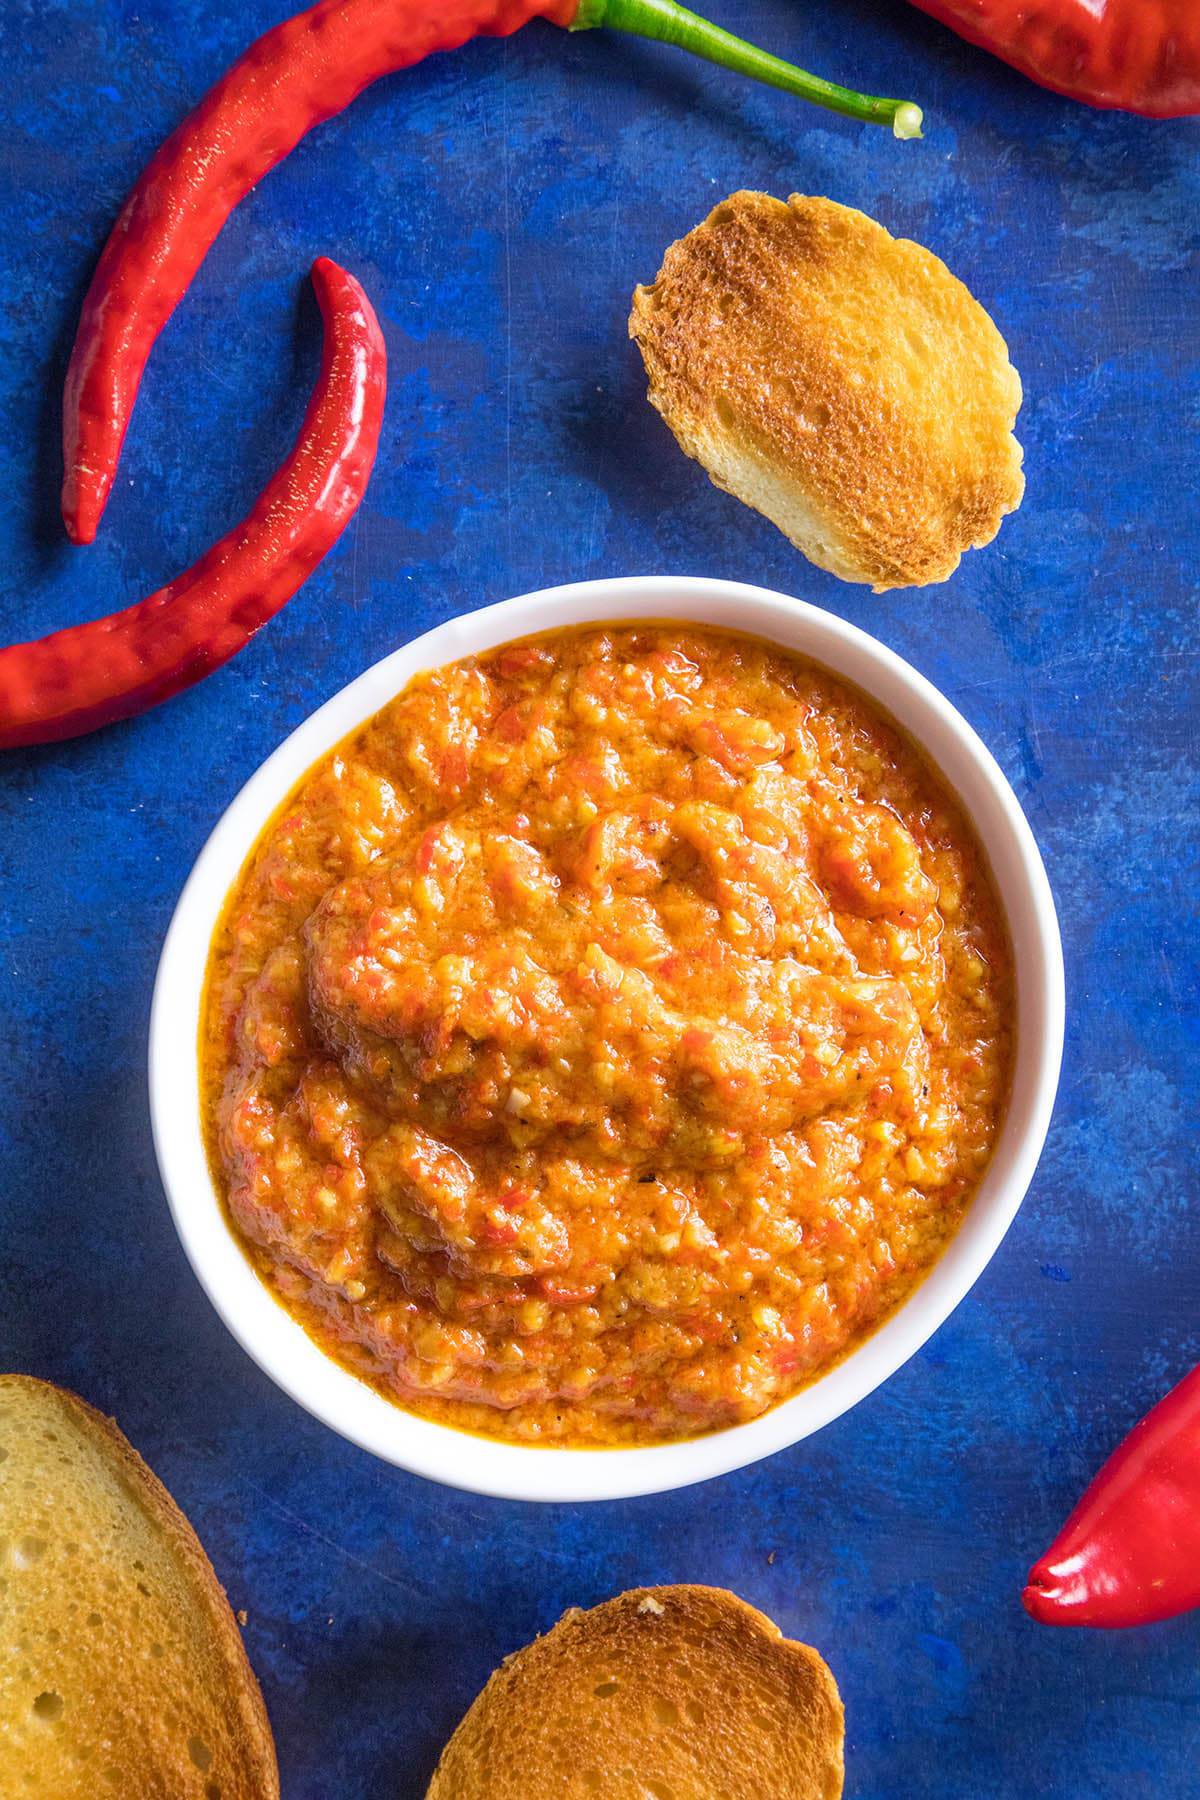 This Ajvar is ready to eat, in a bowl